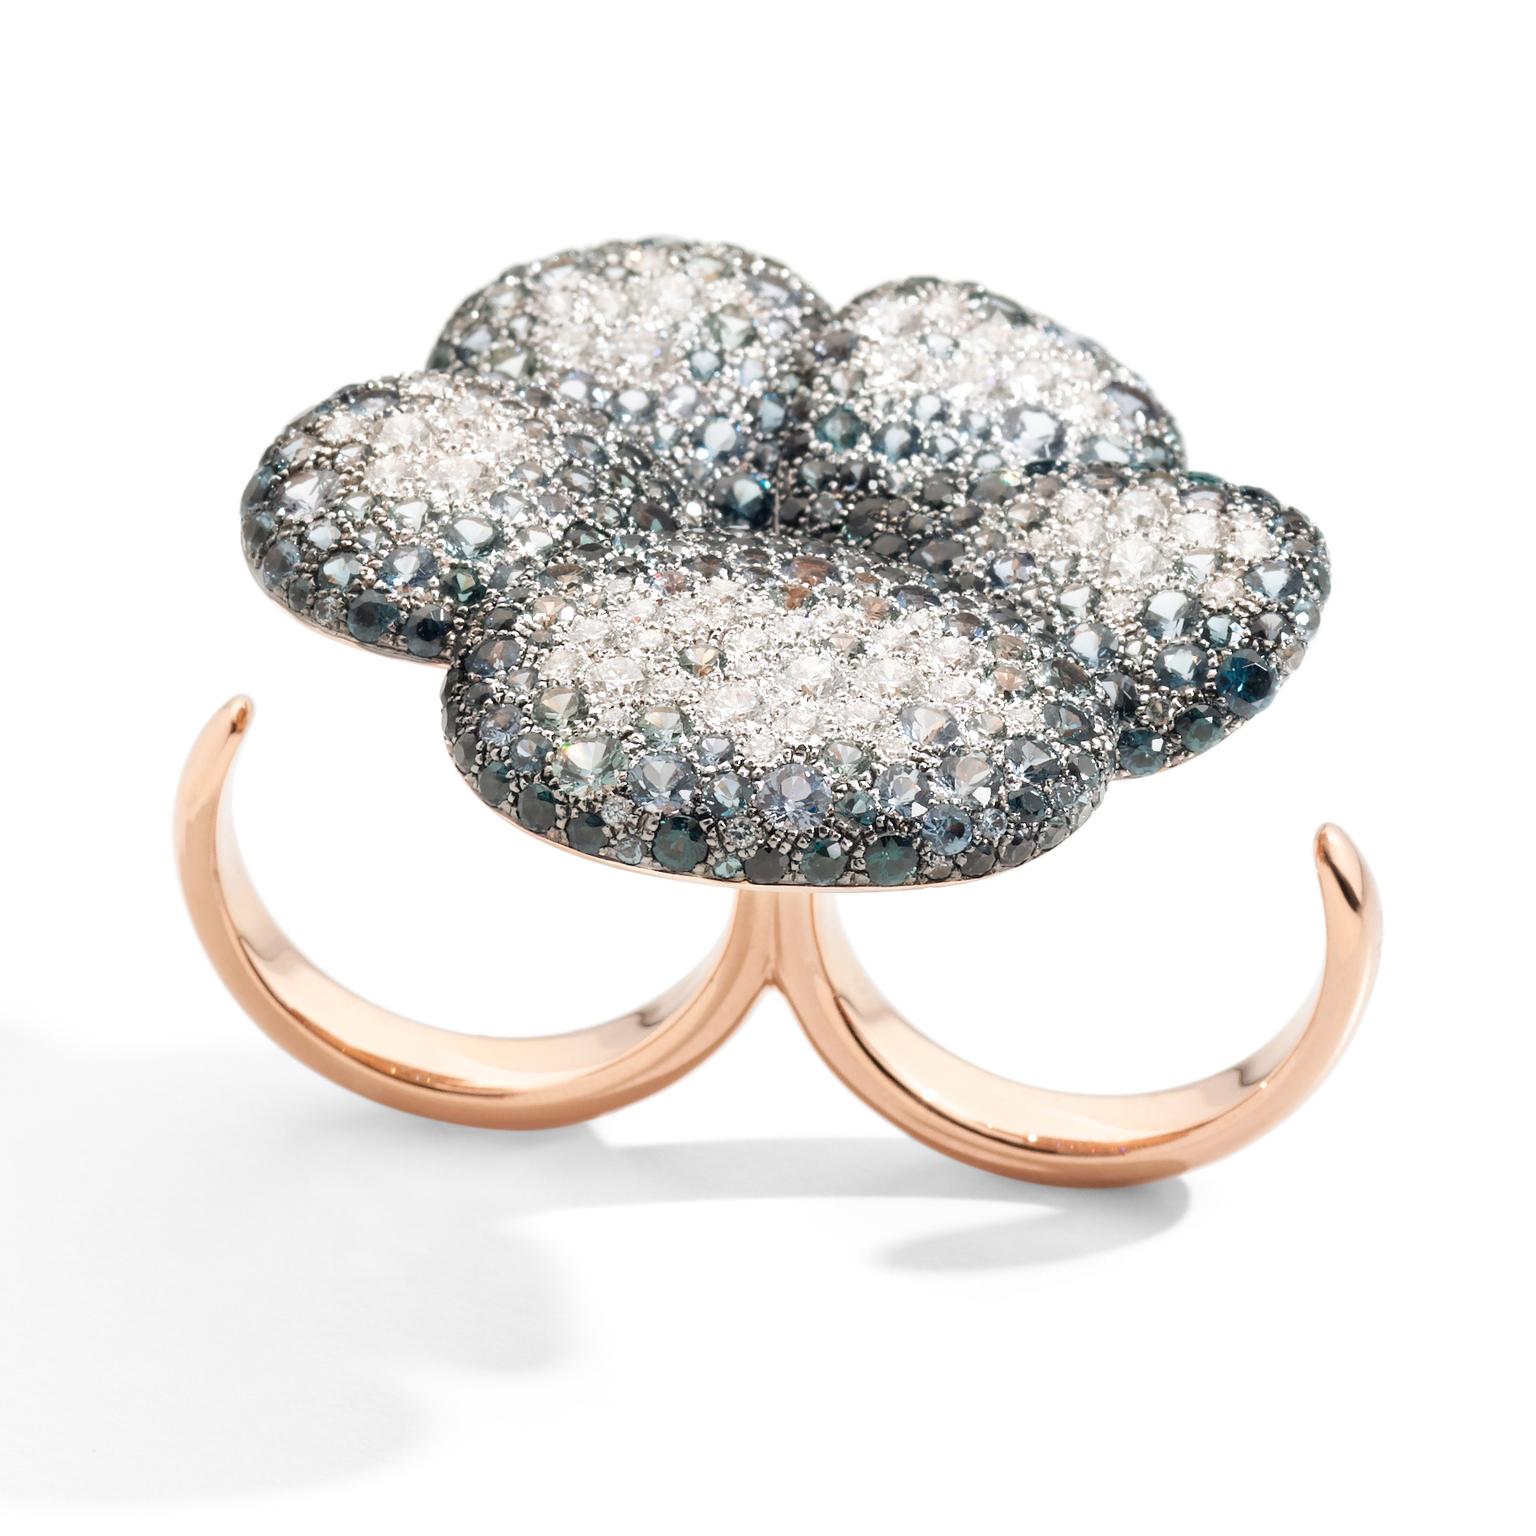 Evening Shadow Flower Power ring by Pomellato